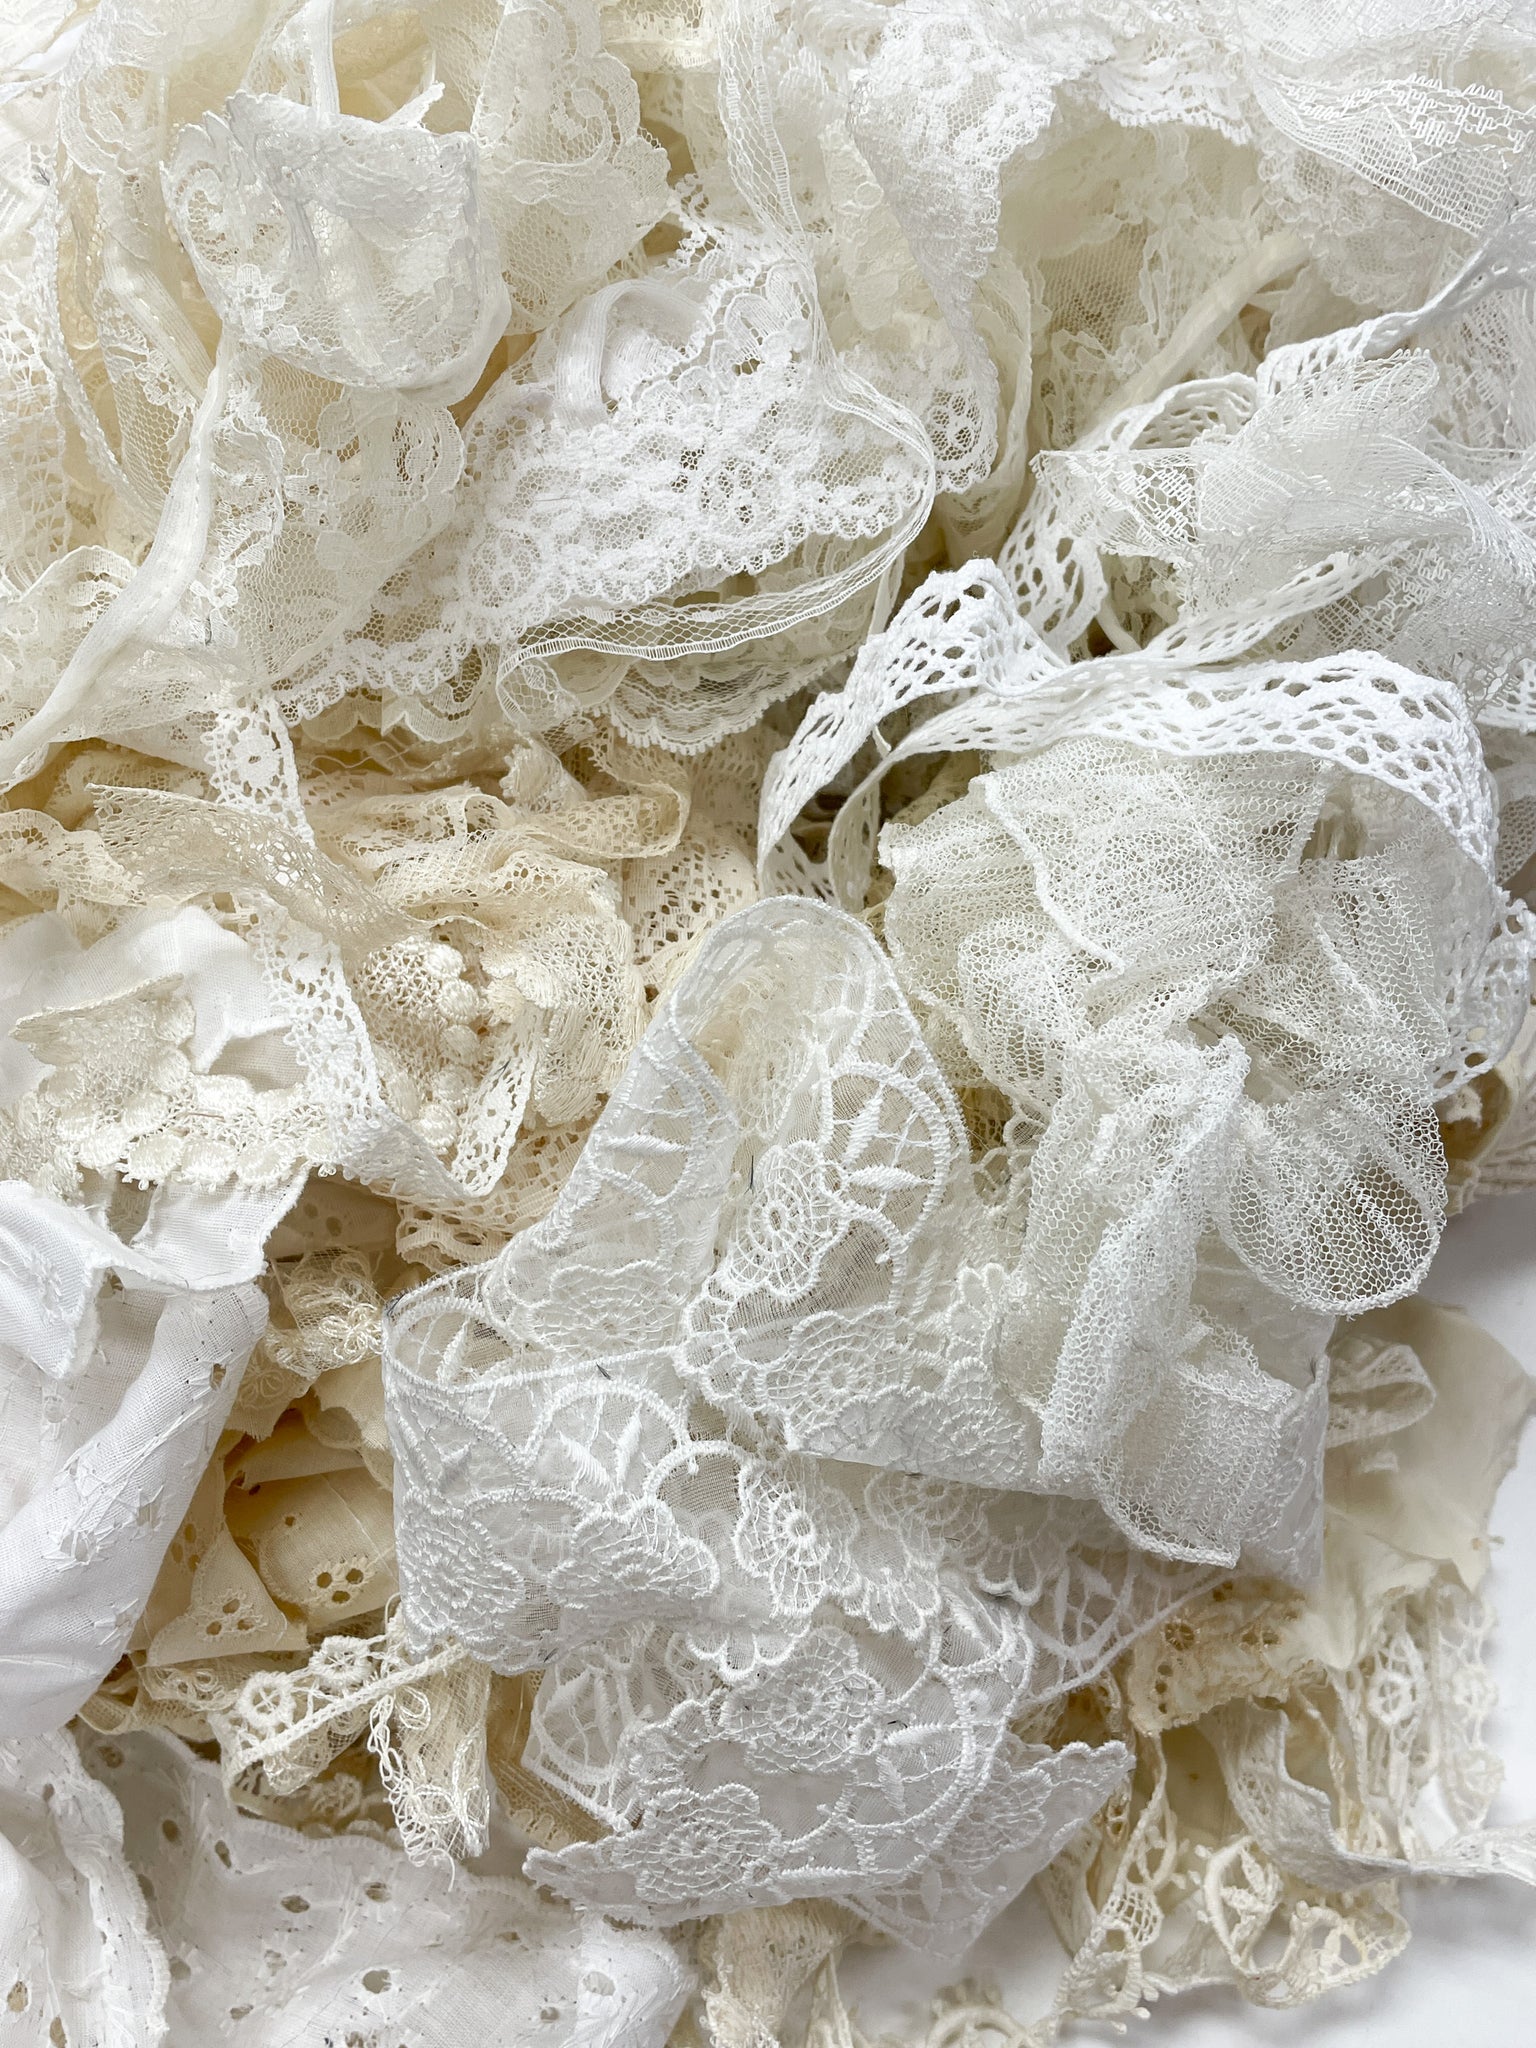 Remnant Bundle Mystery Lace Trims Scraps - Whites and Off Whites 1 POUND